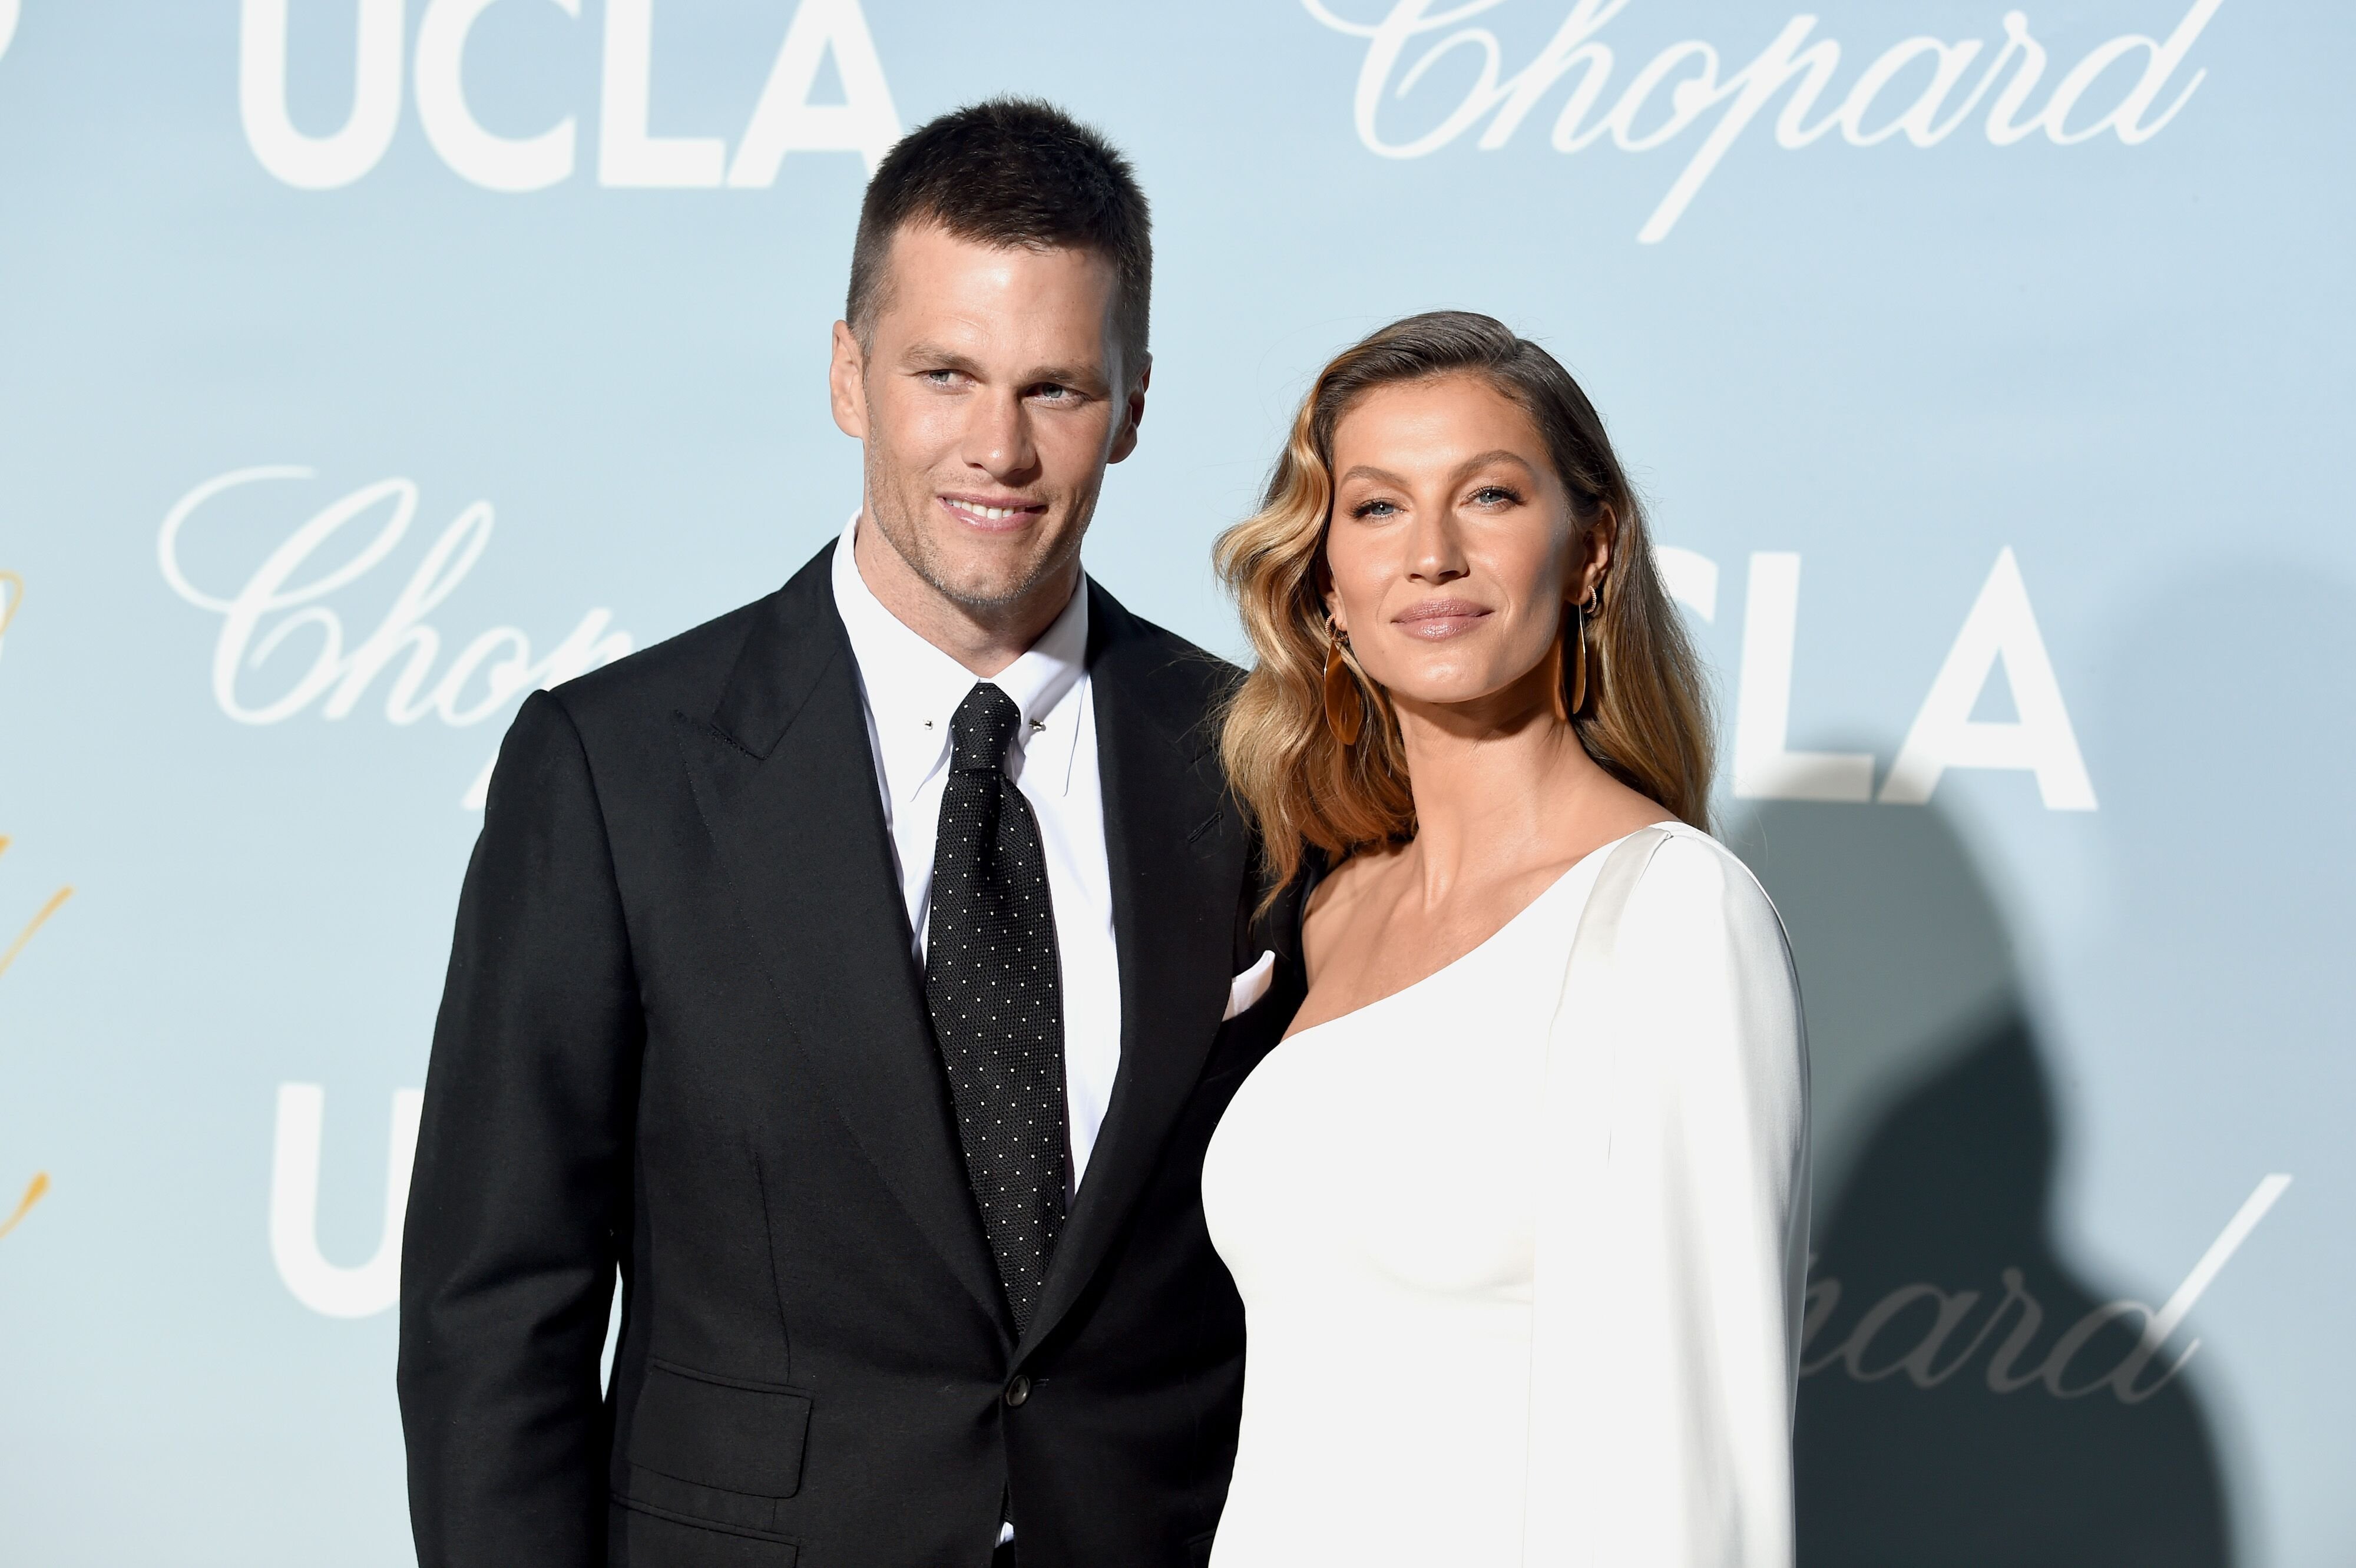 Tom Brady and Gisele Bündchen at the 2019 Hollywood For Science Gala at Private Residence on February 21, 2019. | Photo: Getty Images